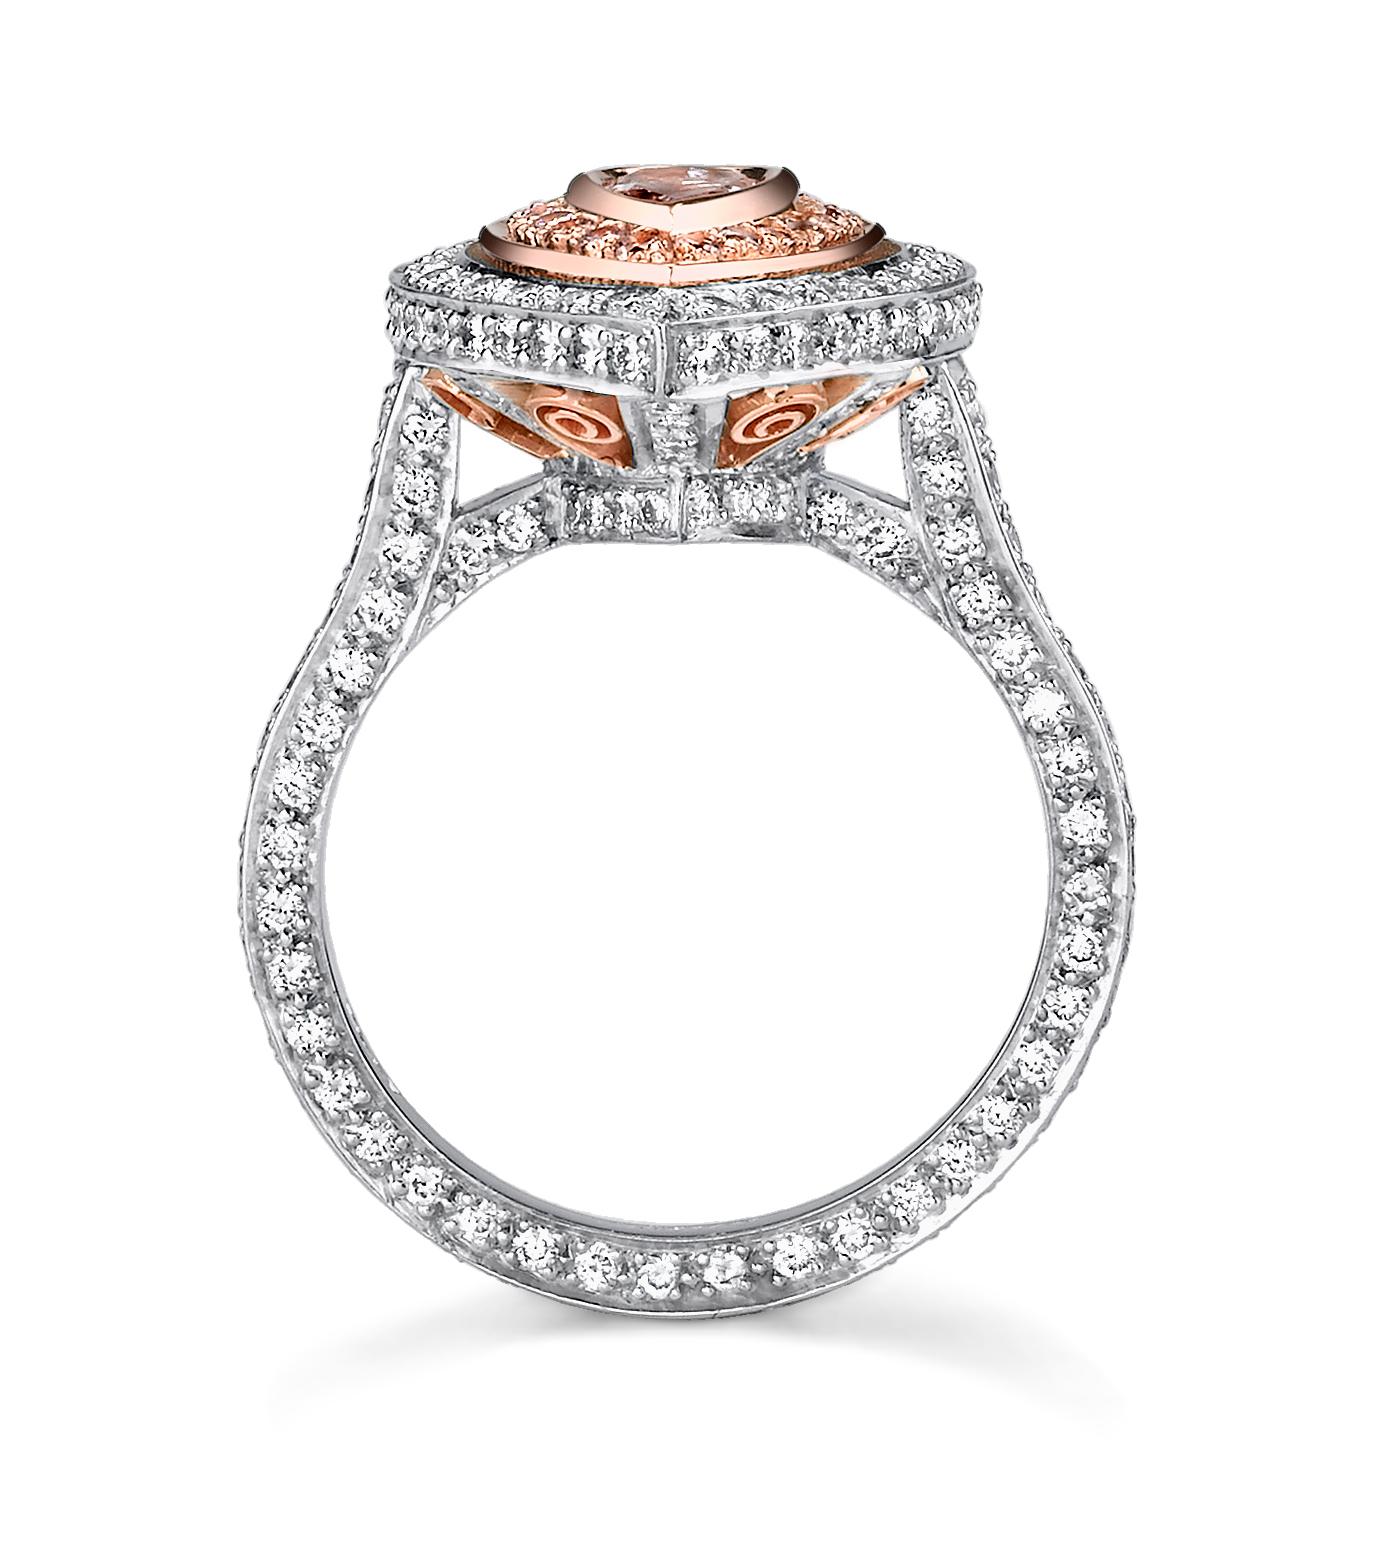  This flirty, feminine ring features a 0.75 ct pear-shaped natural fancy pink diamond set in delicate  18 Rose Gold and Platinum accented with filigree detail. This striking center stone is framed in 0.19 ct natural pink diamonds and 1.70 ct white